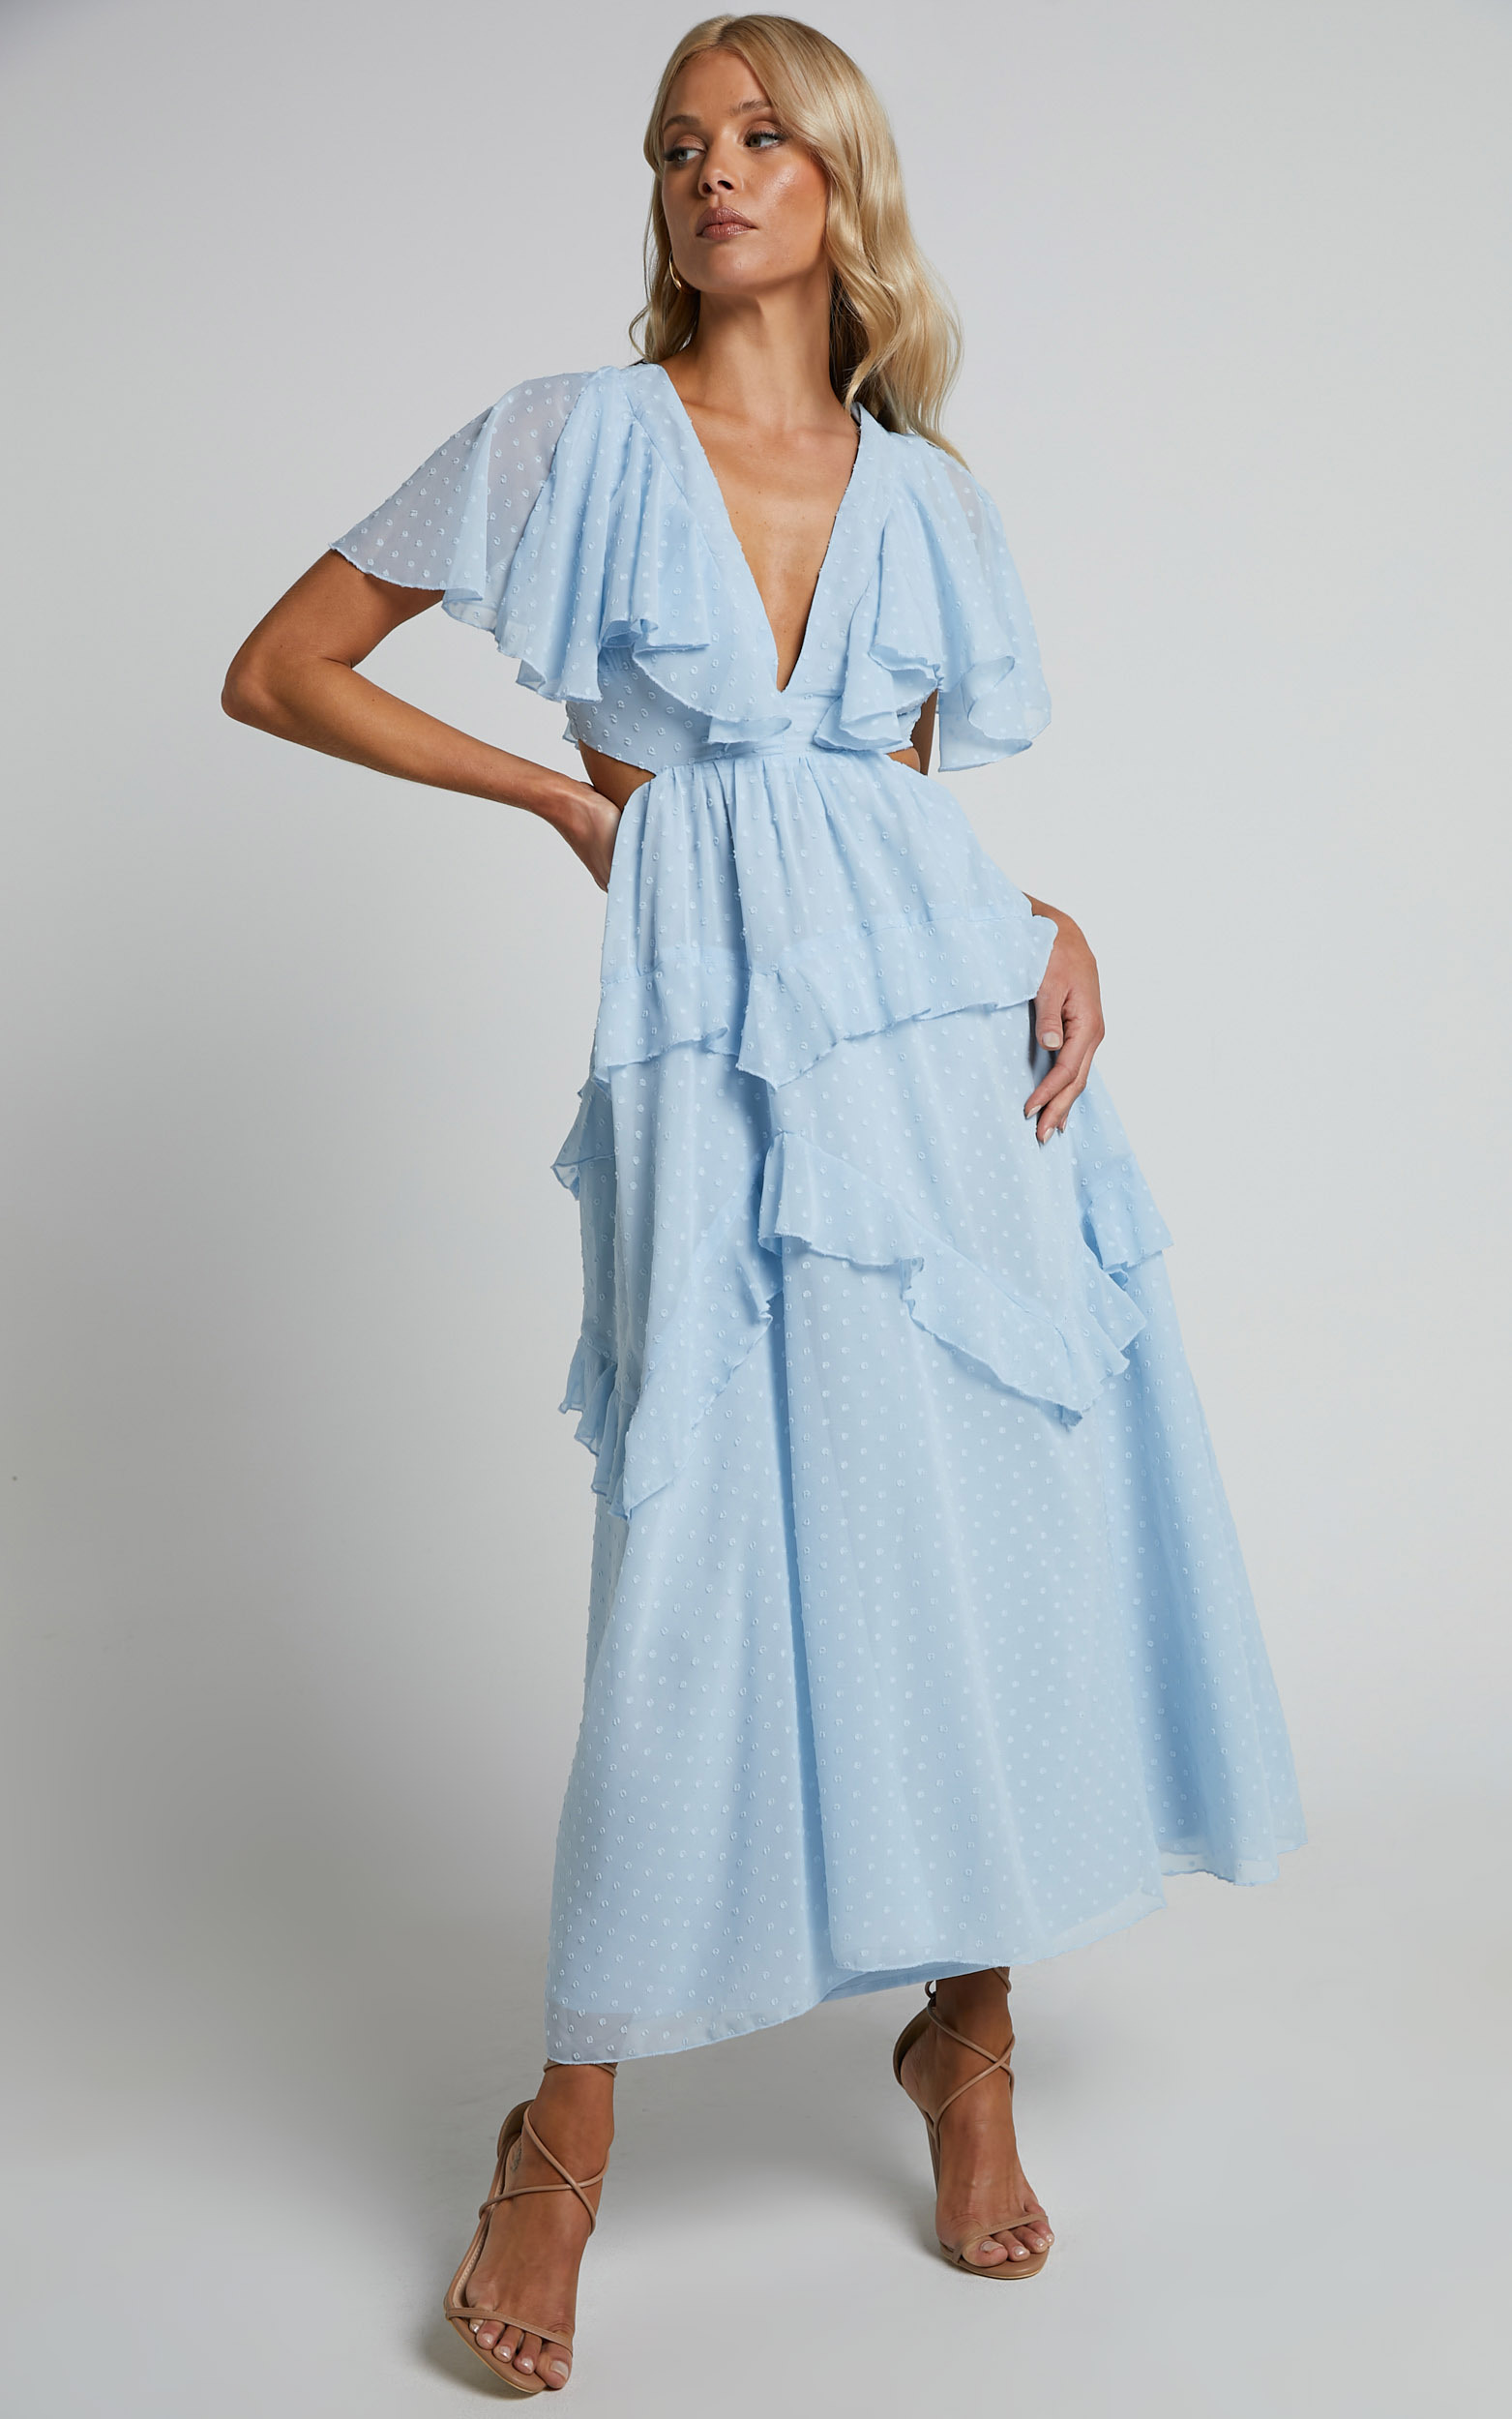 Jania Maxi Dress - Cut Out Short Sleeve Plunge Neck Dress in Pale Blue - 04, BLU1, hi-res image number null